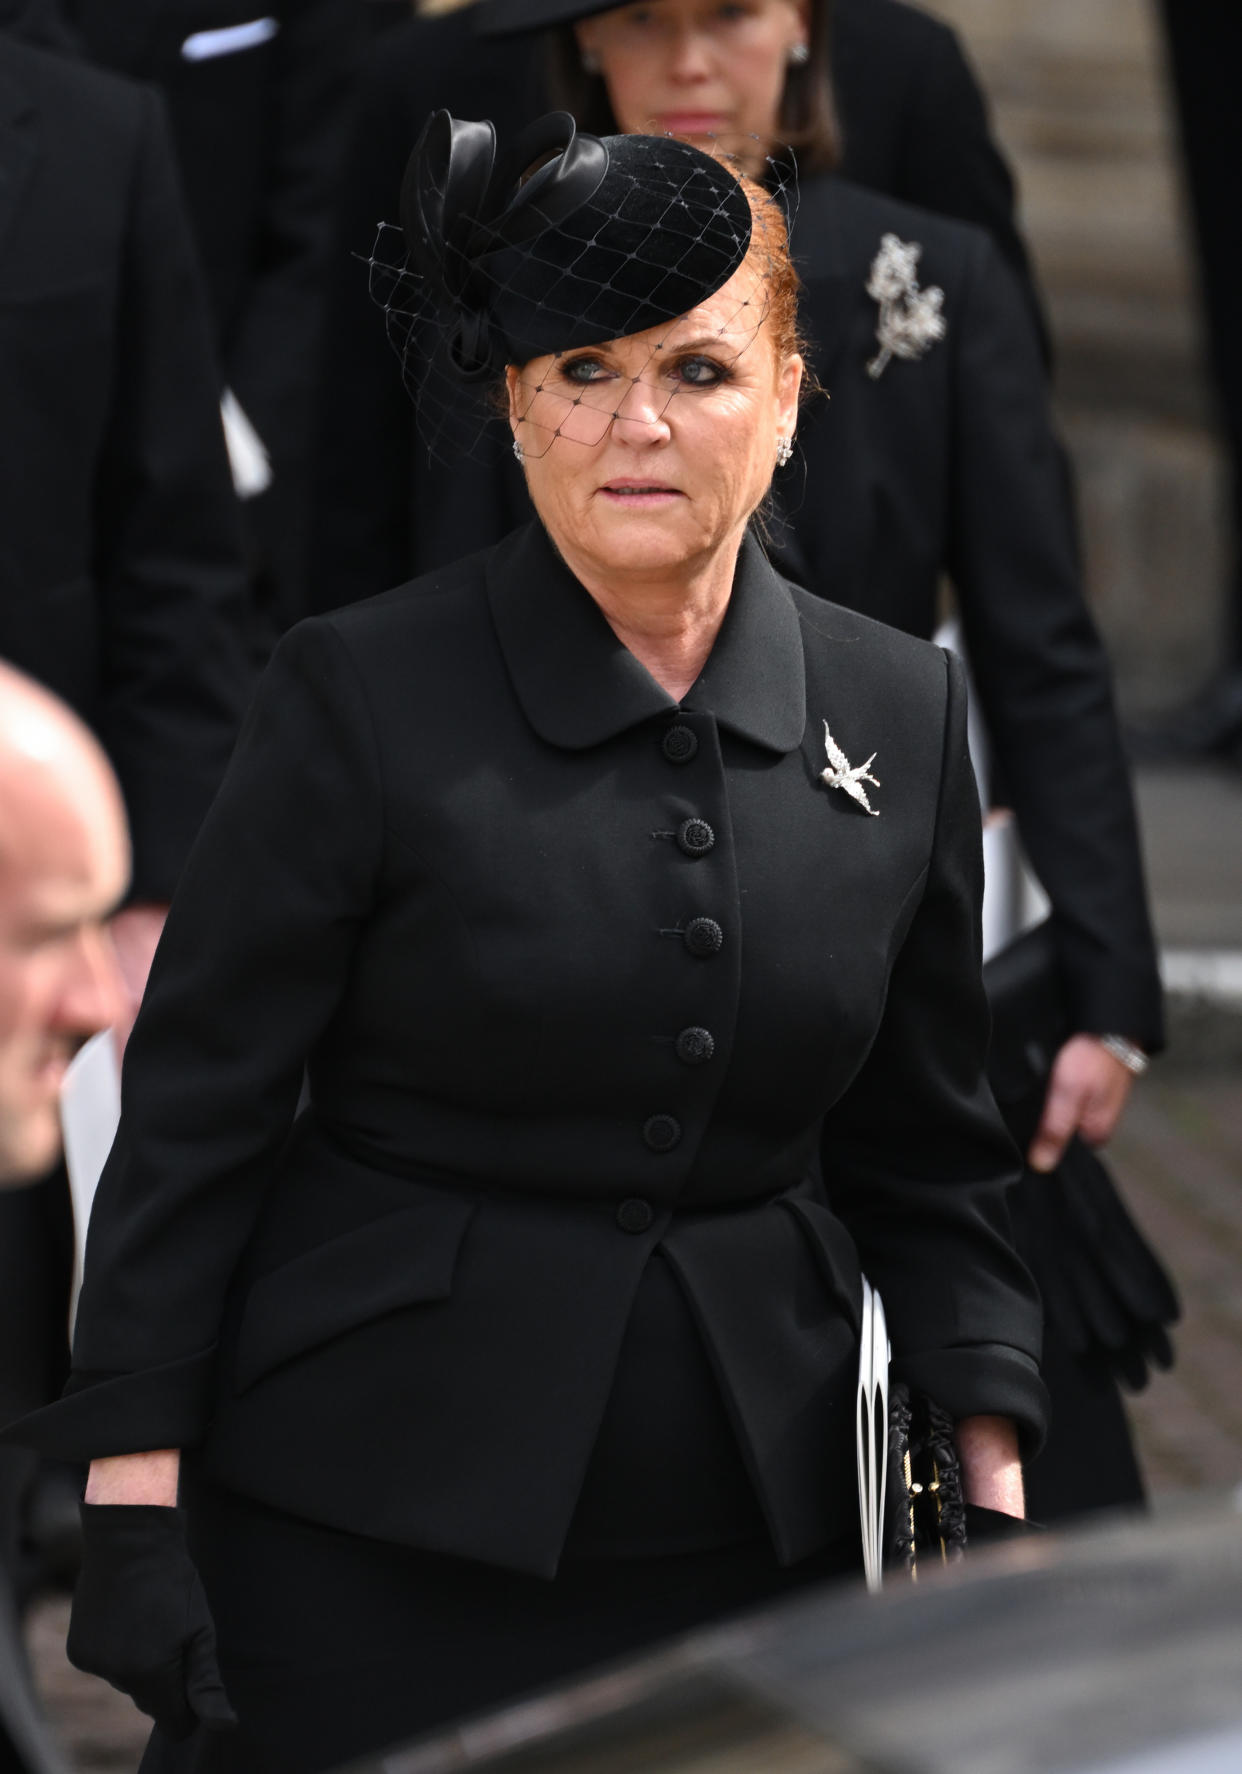 LONDON, ENGLAND - SEPTEMBER 19: Sarah, Duchess of York during the State Funeral of Queen Elizabeth II at Westminster Abbey on September 19, 2022 in London, England. Elizabeth Alexandra Mary Windsor was born in Bruton Street, Mayfair, London on 21 April 1926. She married Prince Philip in 1947 and ascended the throne of the United Kingdom and Commonwealth on 6 February 1952 after the death of her Father, King George VI. Queen Elizabeth II died at Balmoral Castle in Scotland on September 8, 2022, and is succeeded by her eldest son, King Charles III. (Photo by Karwai Tang/WireImage)